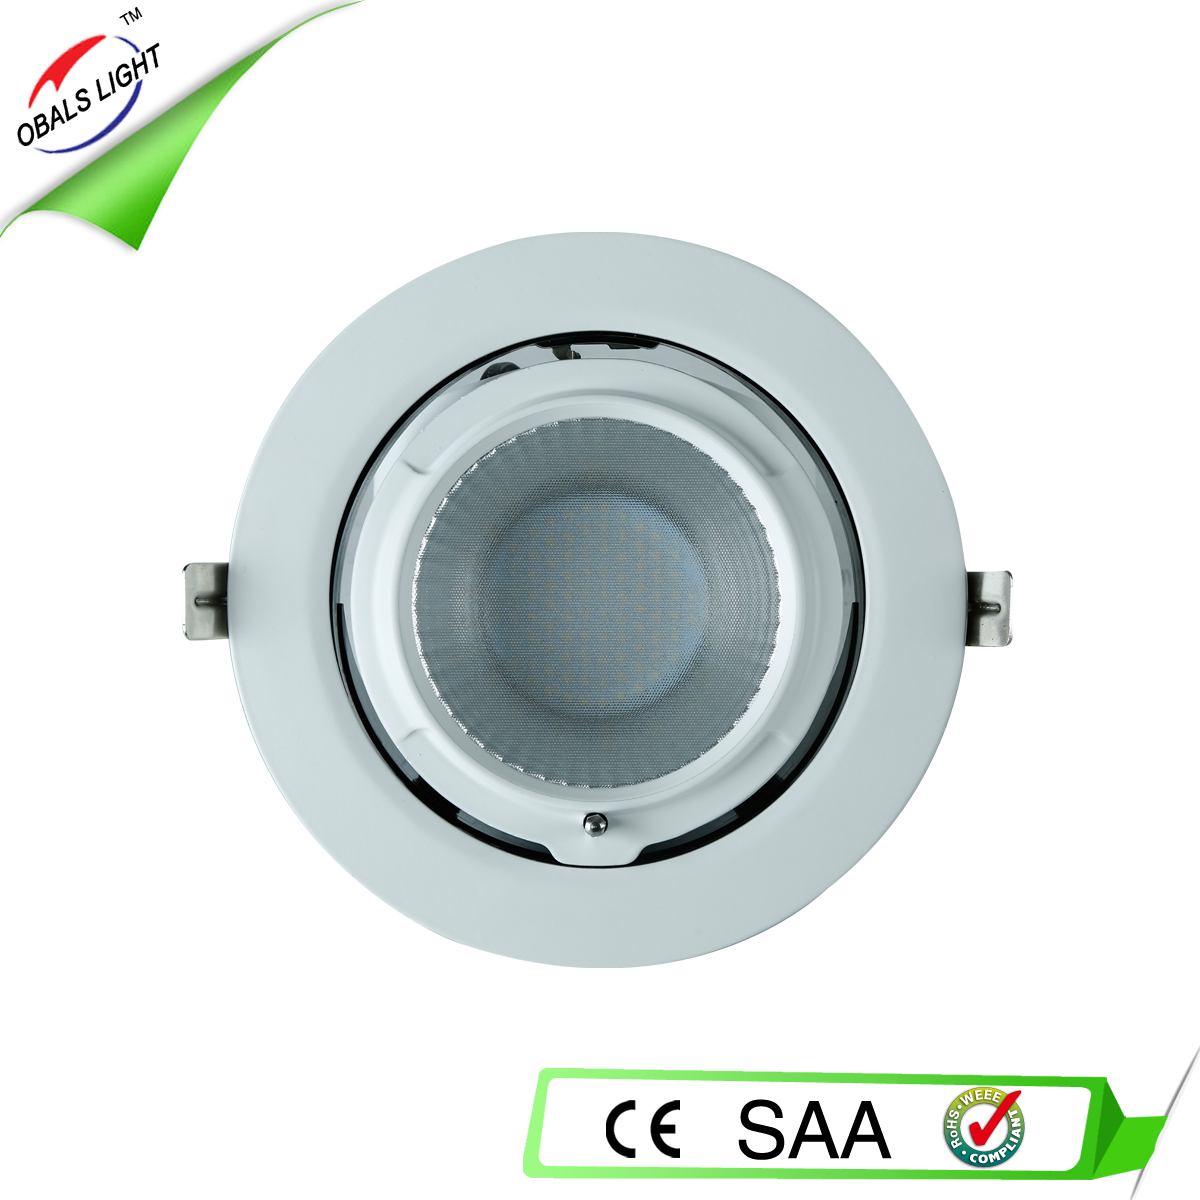 SMD 28W directional adjustable led downlight CE ROHS SAA certificated